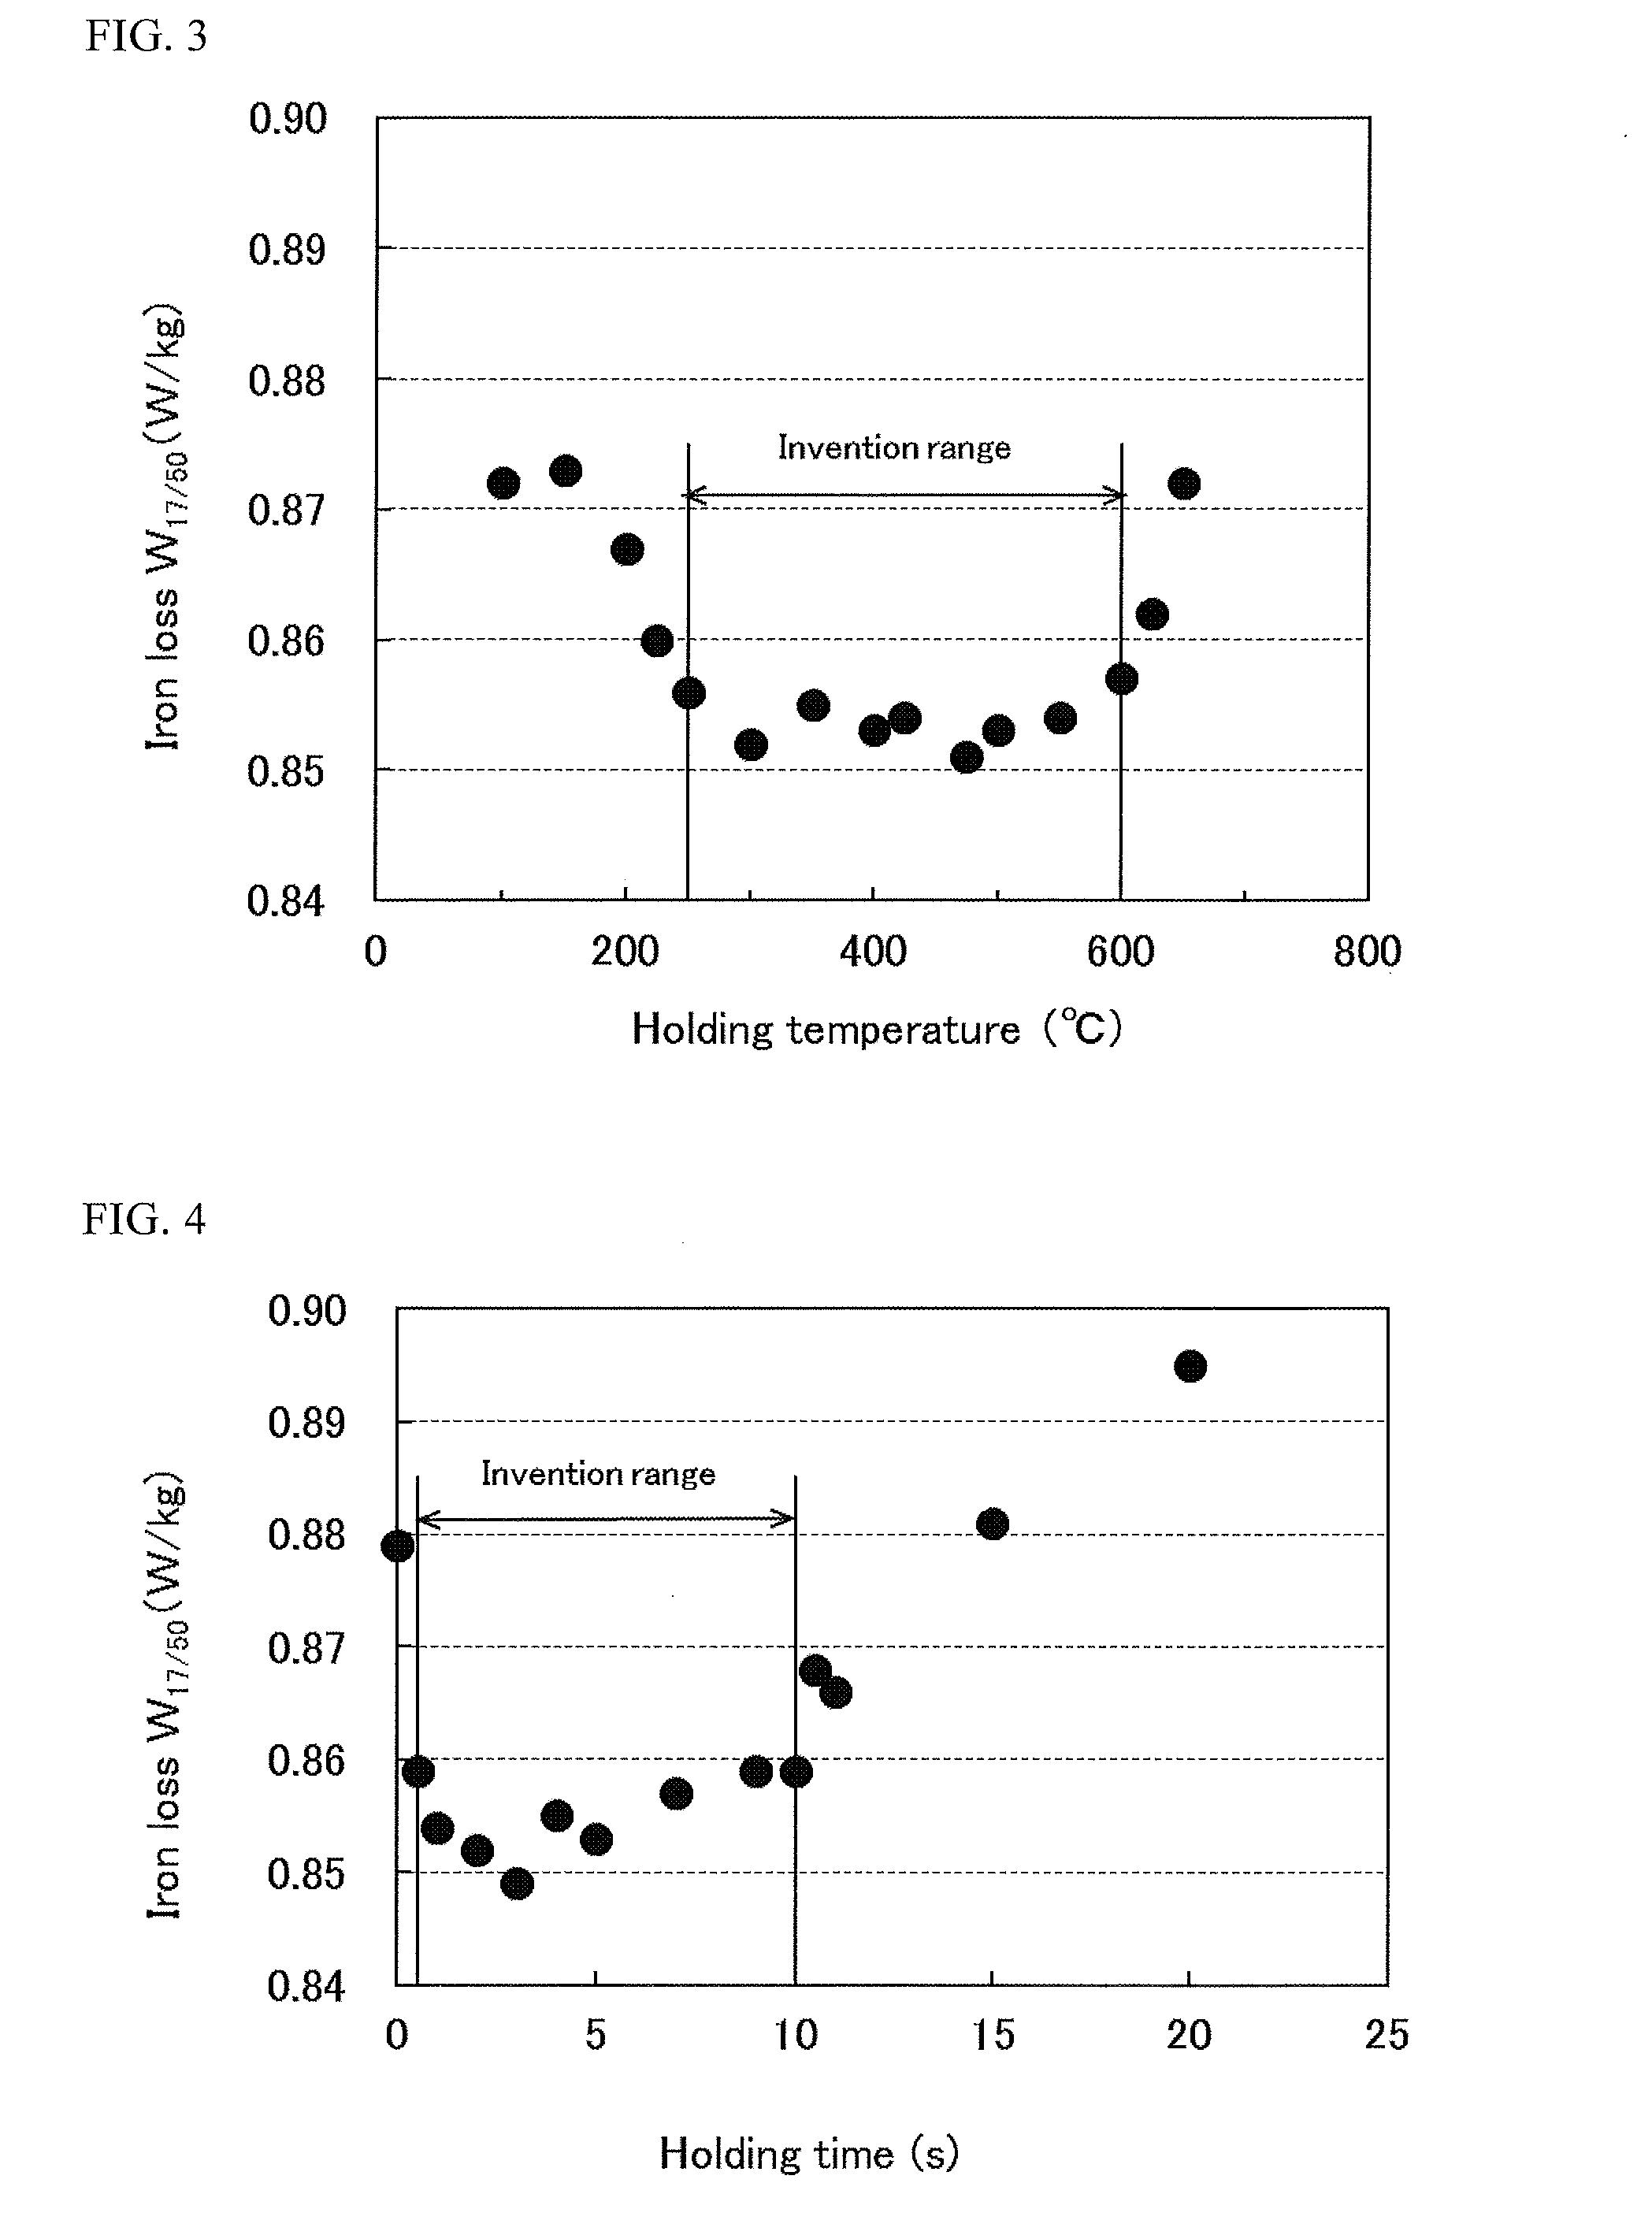 Method for producing grain-oriented electrical steel sheet (as amended)